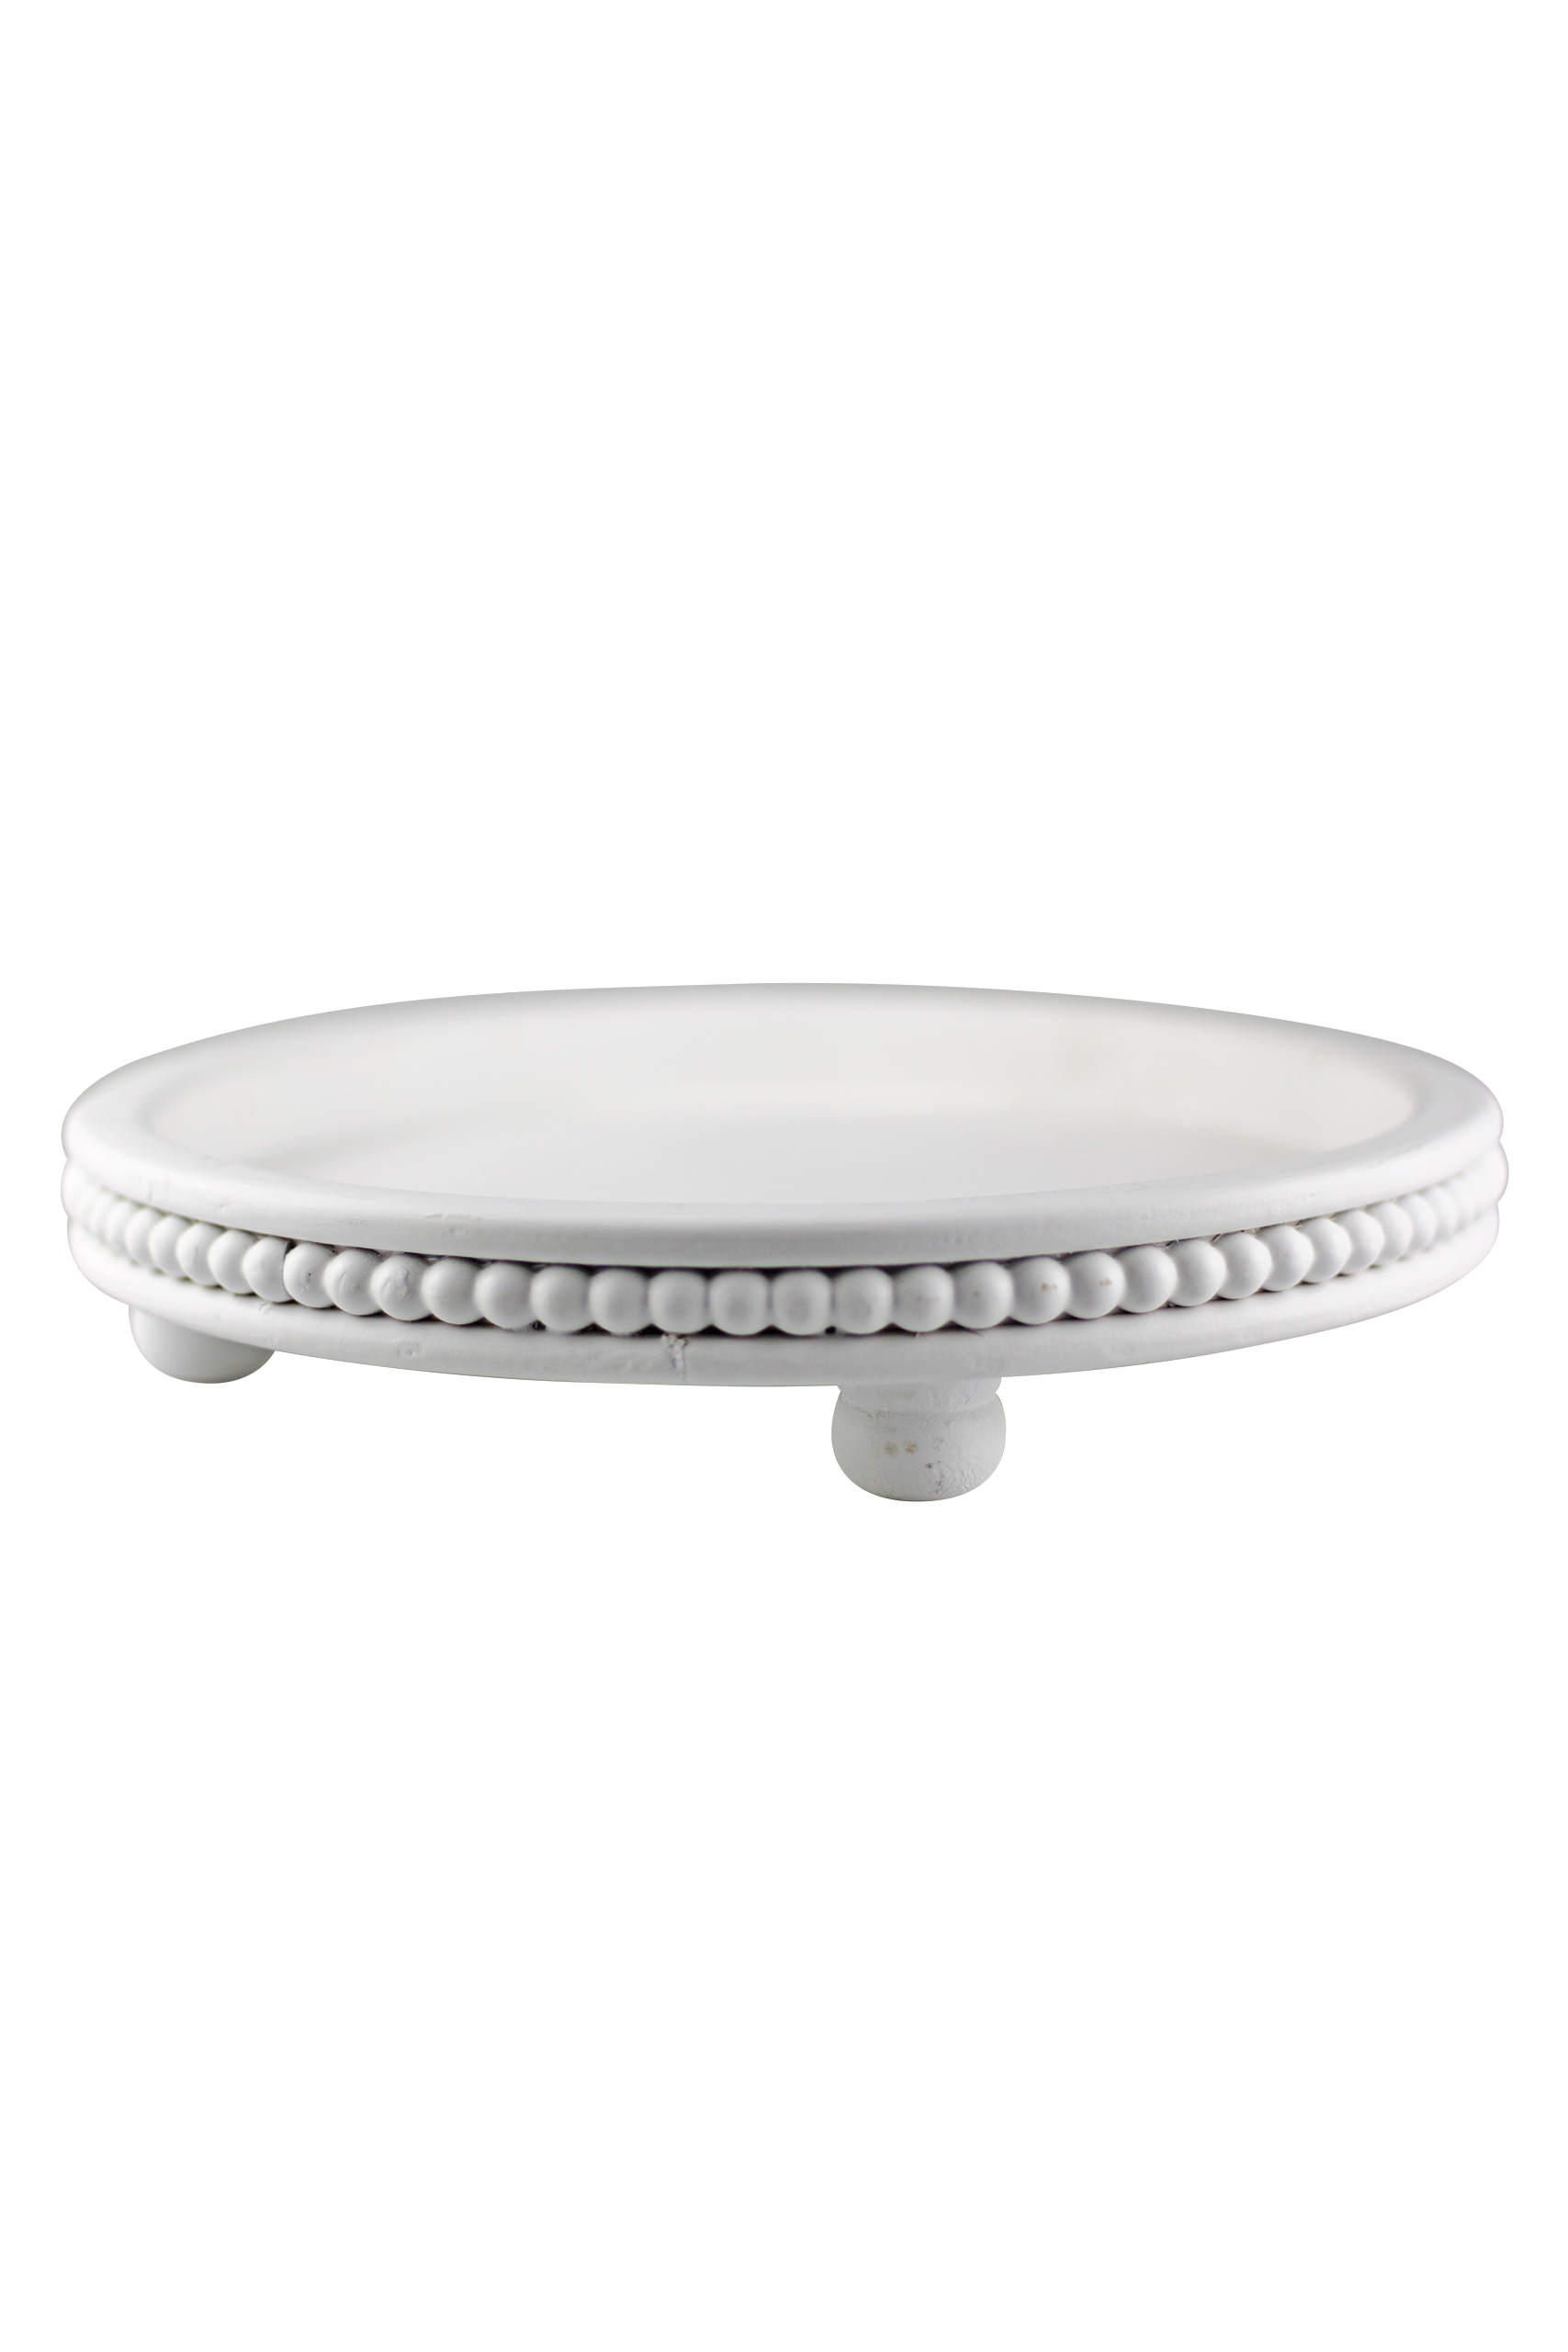 Beaded Round Tray - White | Pretty Little Home